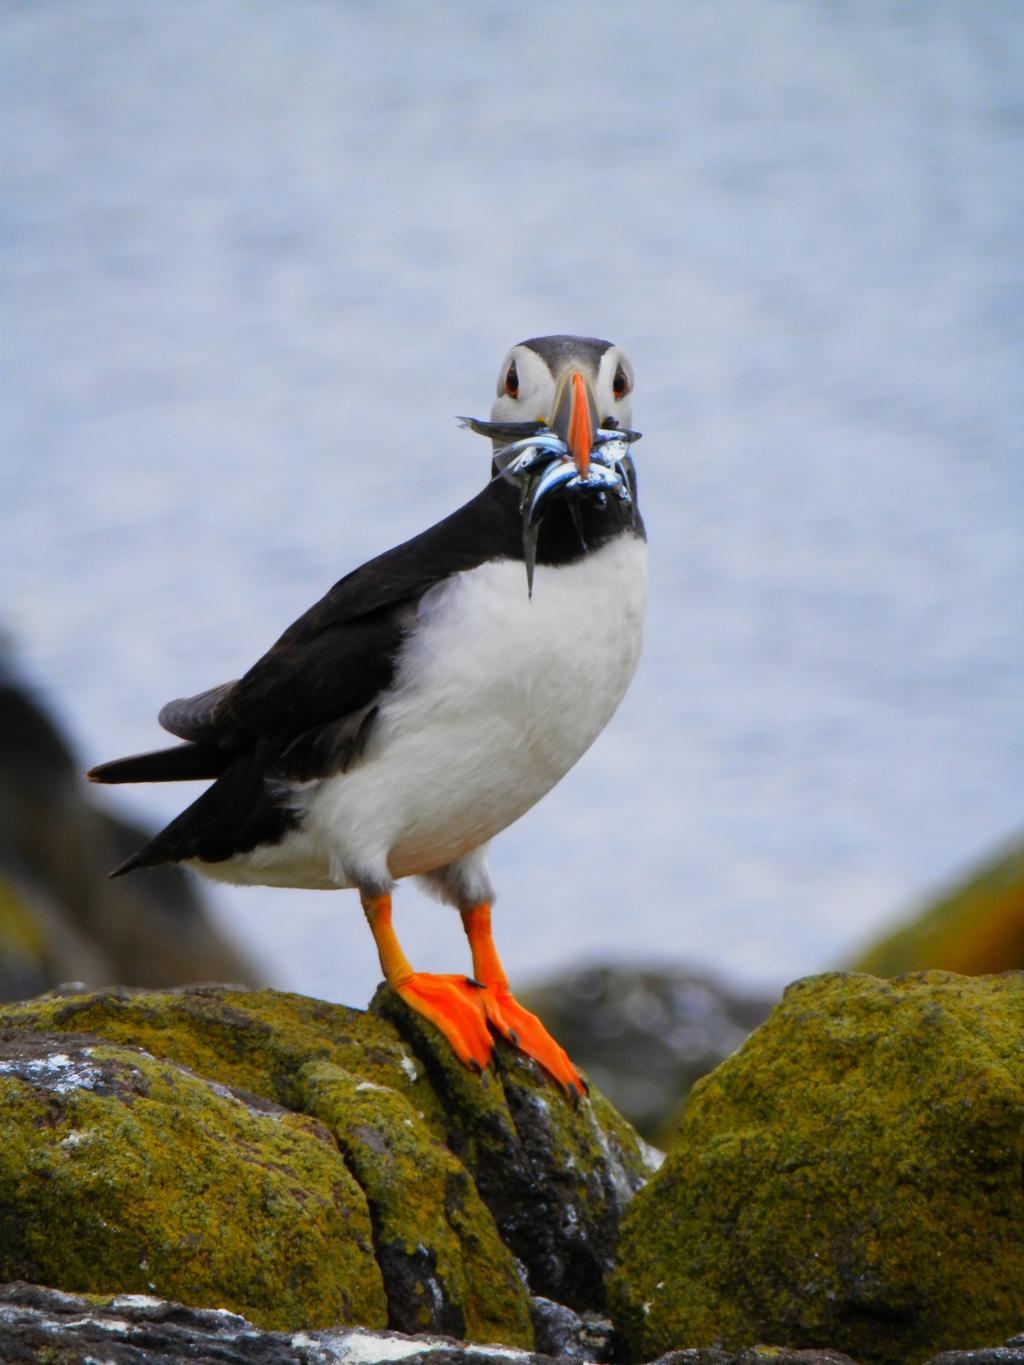 02 OCEAN TOURS a. Gatherall s Puffin and Whale Watching Tour: 90-minute tour of the Witless Bay Ecological Reserve. Tours depart at 10:30am and need to be booked in advance.